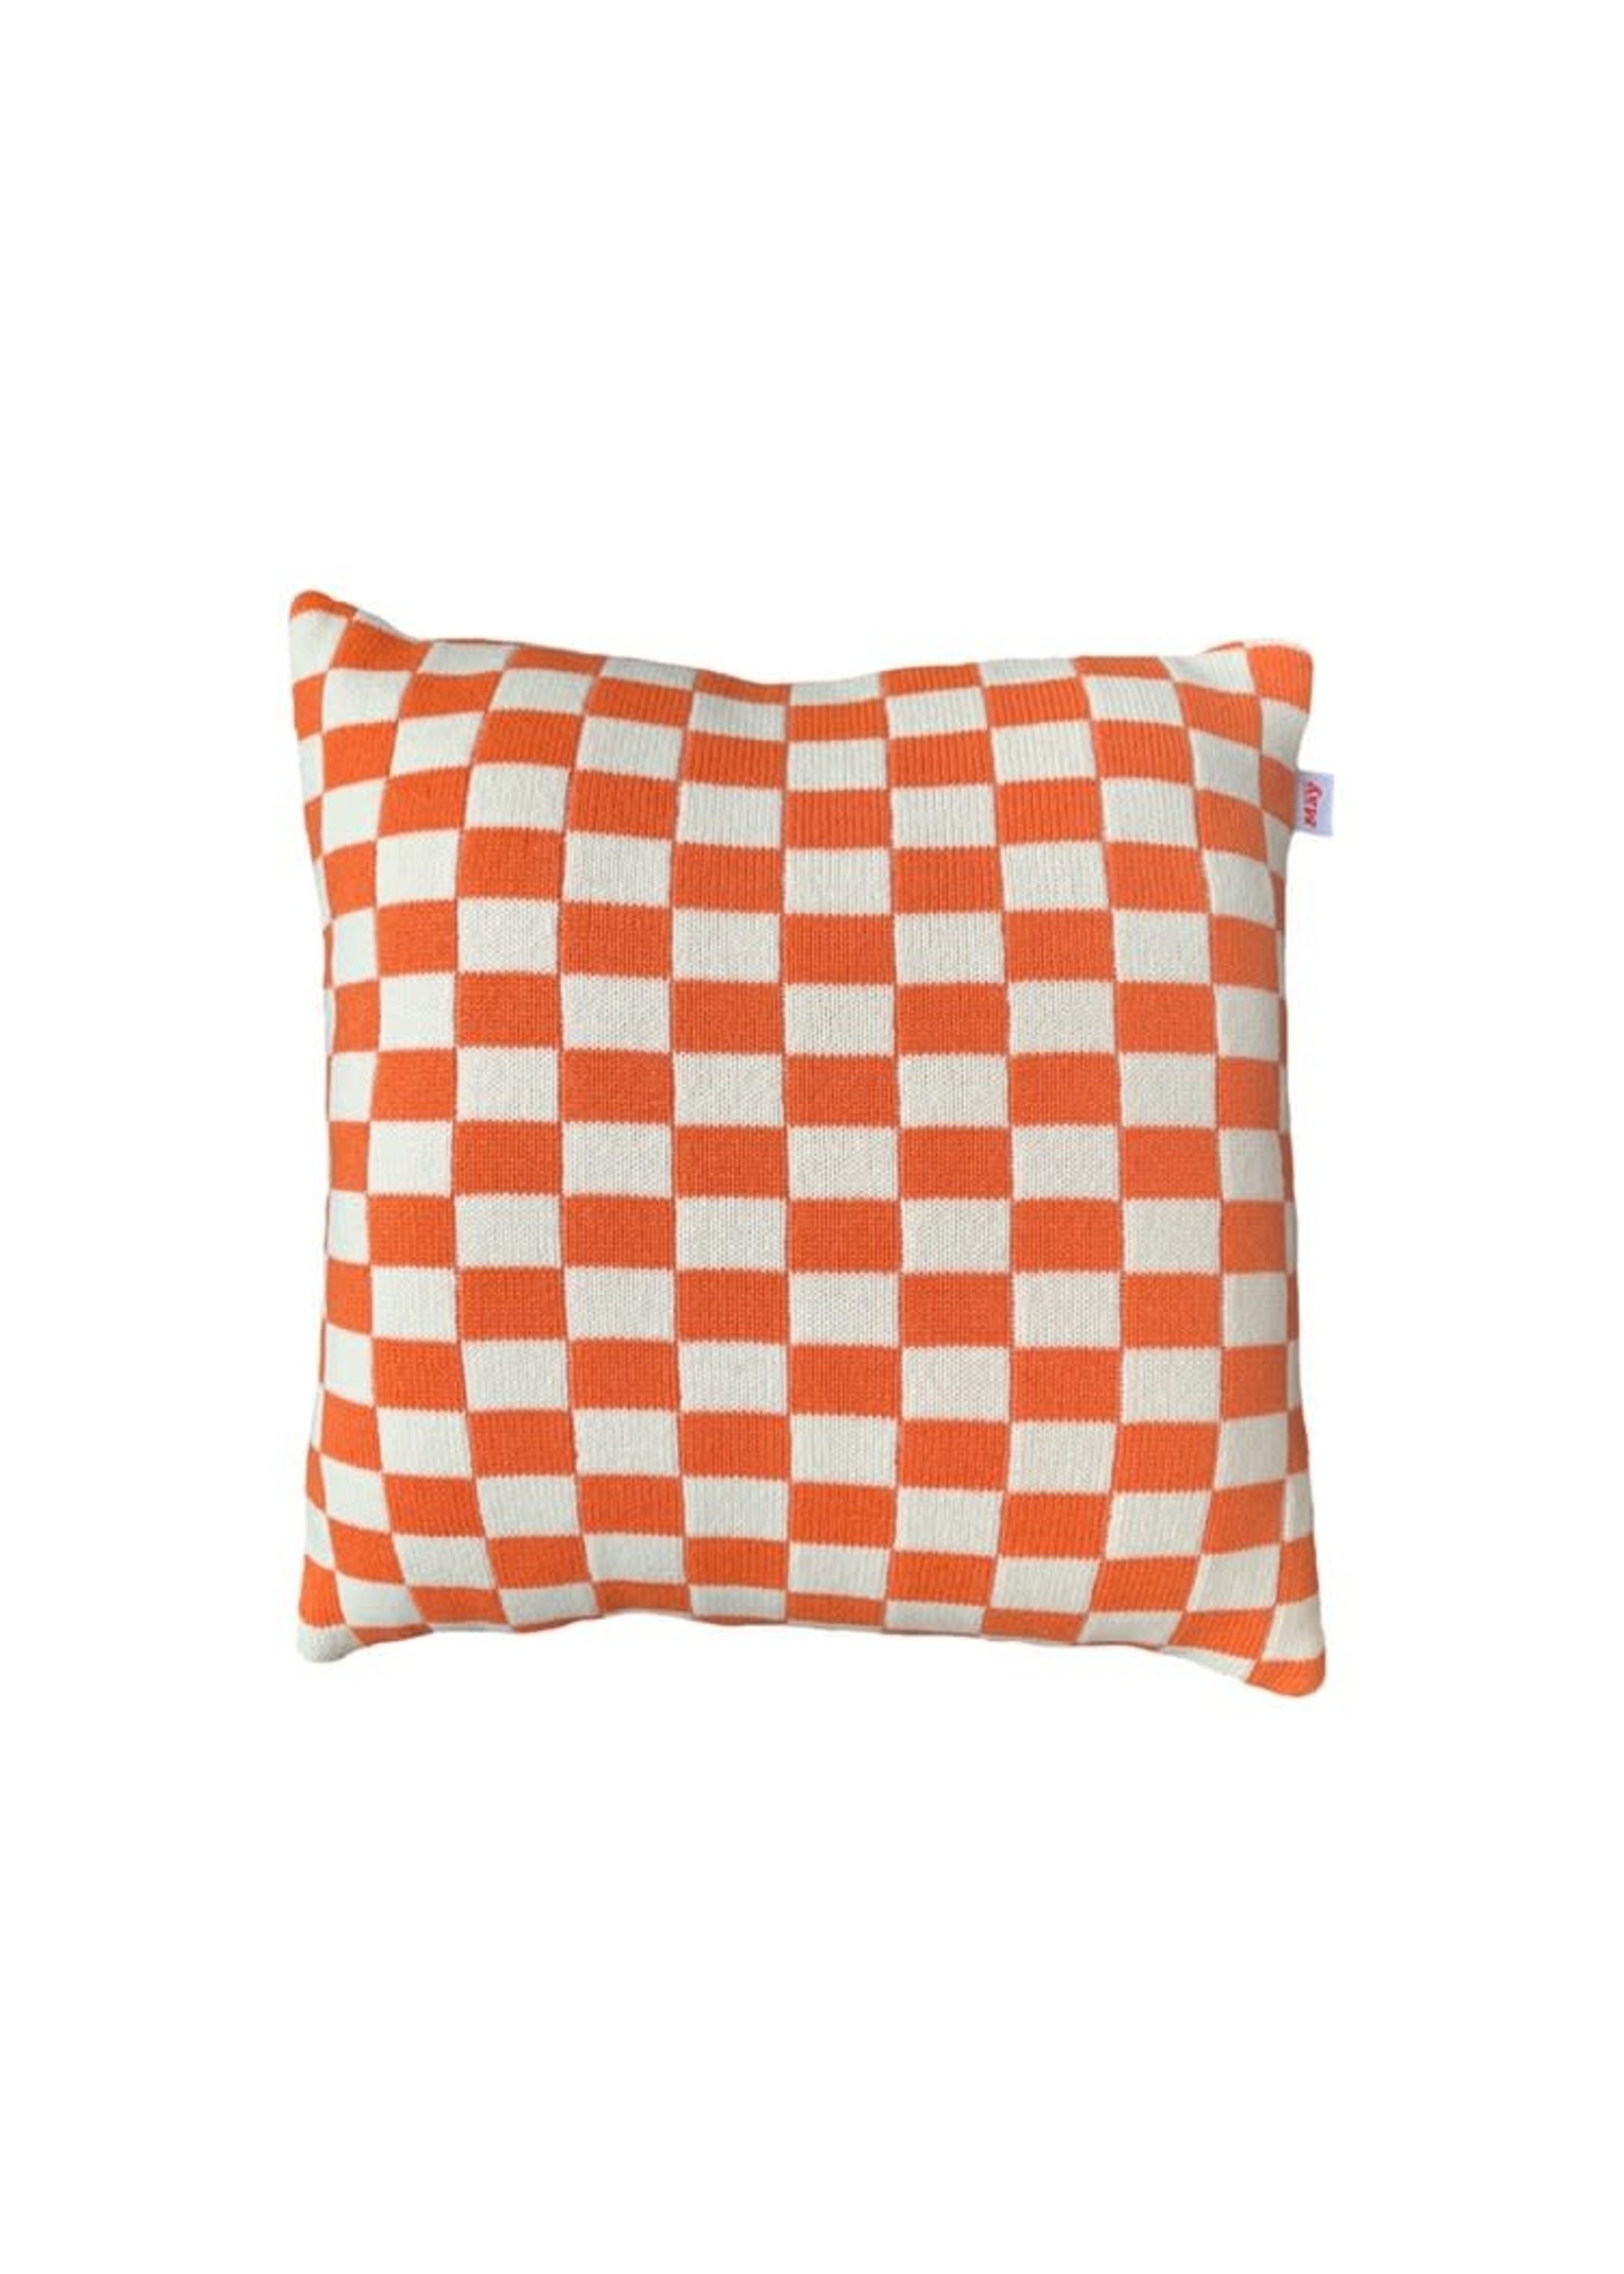 Goods of May Sidney cushion in orange - large 50 x 50cm